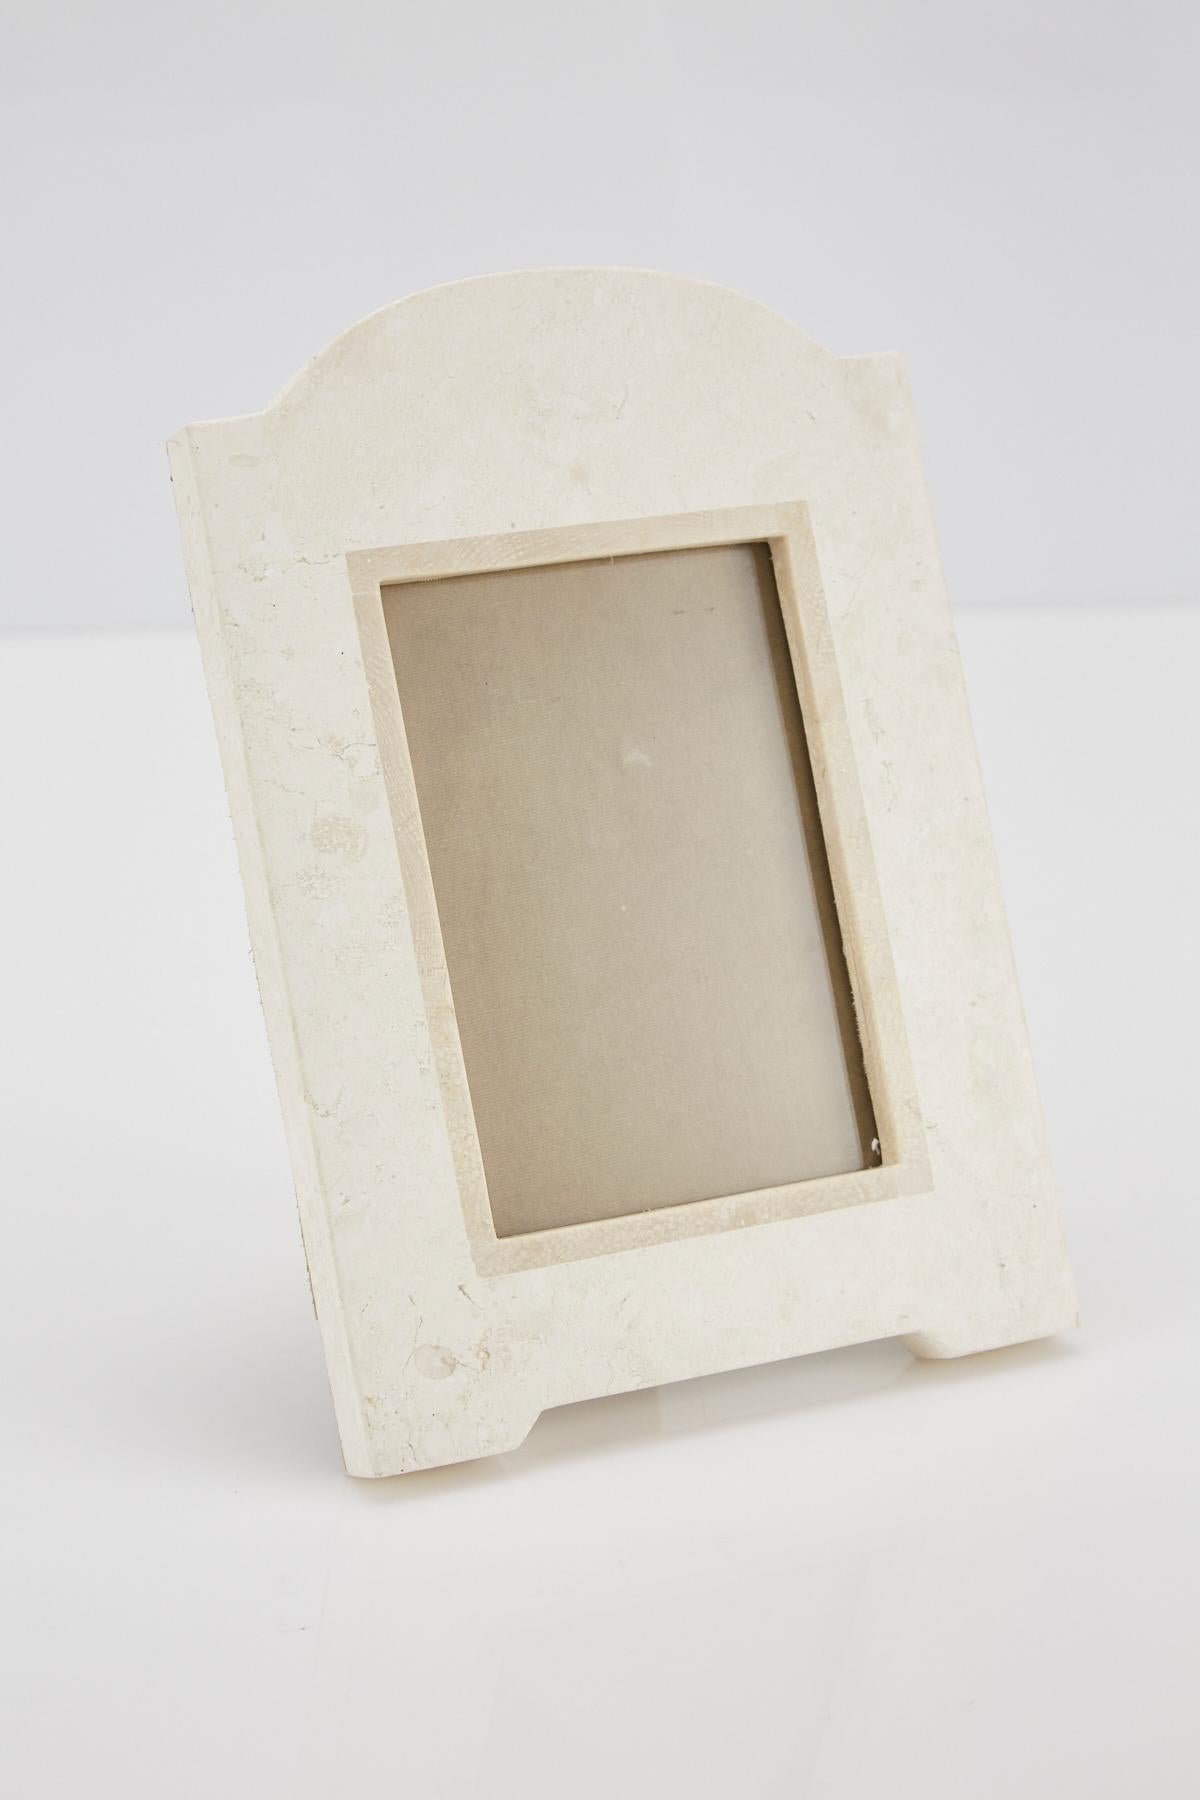 Rectangular picture frame in tessellated white stone with beige fossil stone accent and arched top. Beige felt back. Opening for picture measures 6 x 4 in., frame overall measures 10 3/4 x 7 3/8 in.

All furnishings are made from 100% natural Fossil